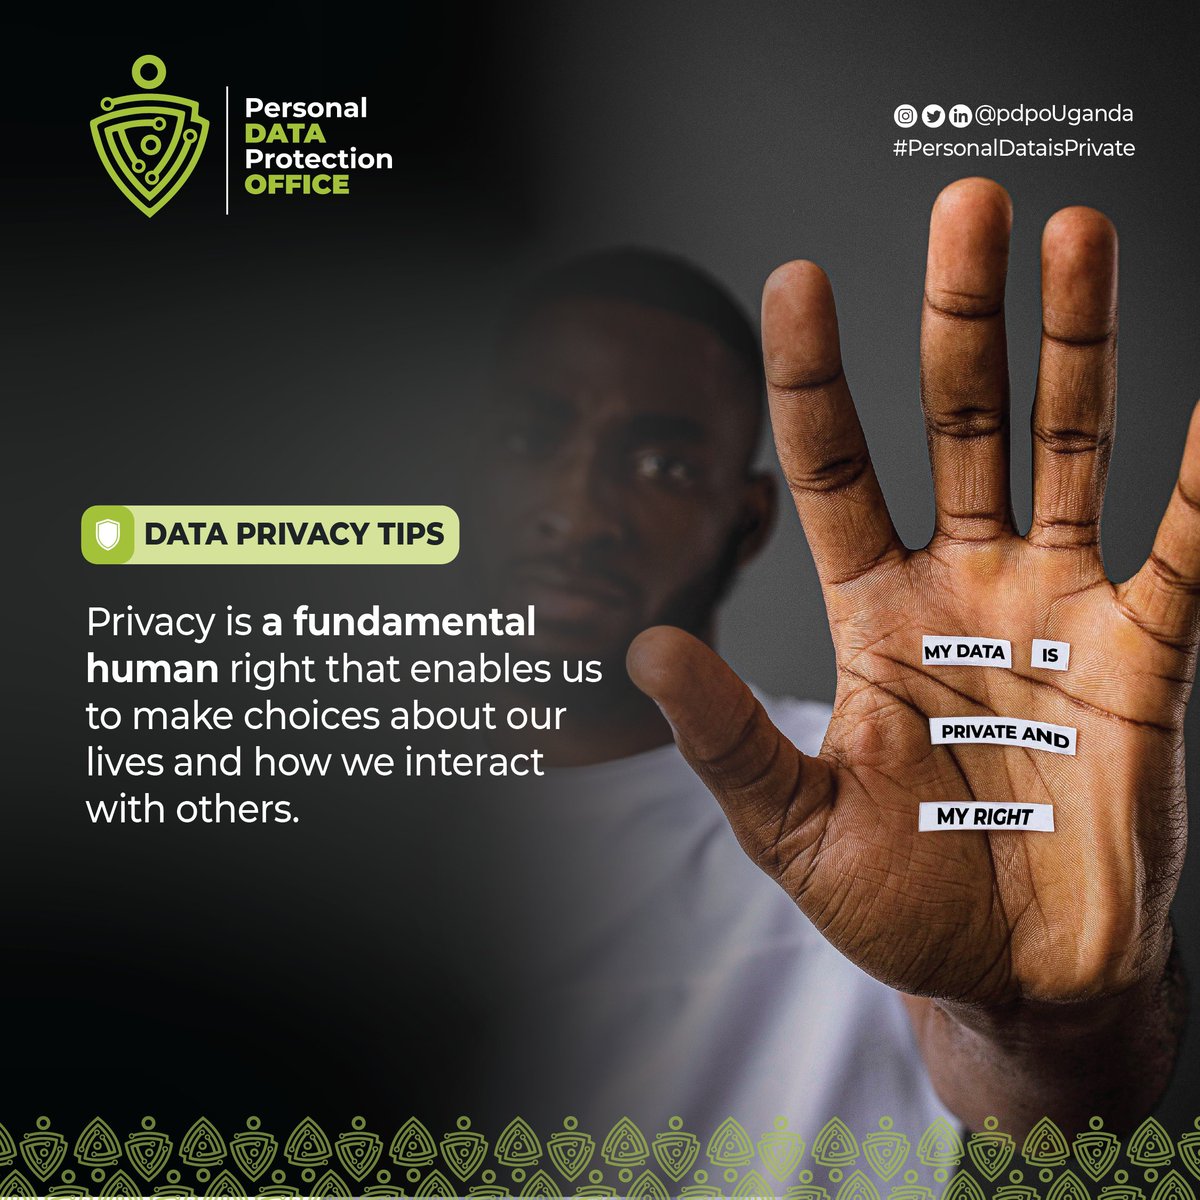 Privacy is not a luxury, it's a fundamental human right. In an increasingly connected world, safeguarding our personal data is essential. Let's champion strong privacy protections and empower individuals to control their own data. #PersonalDataisPrivate #DataPrivacyUG